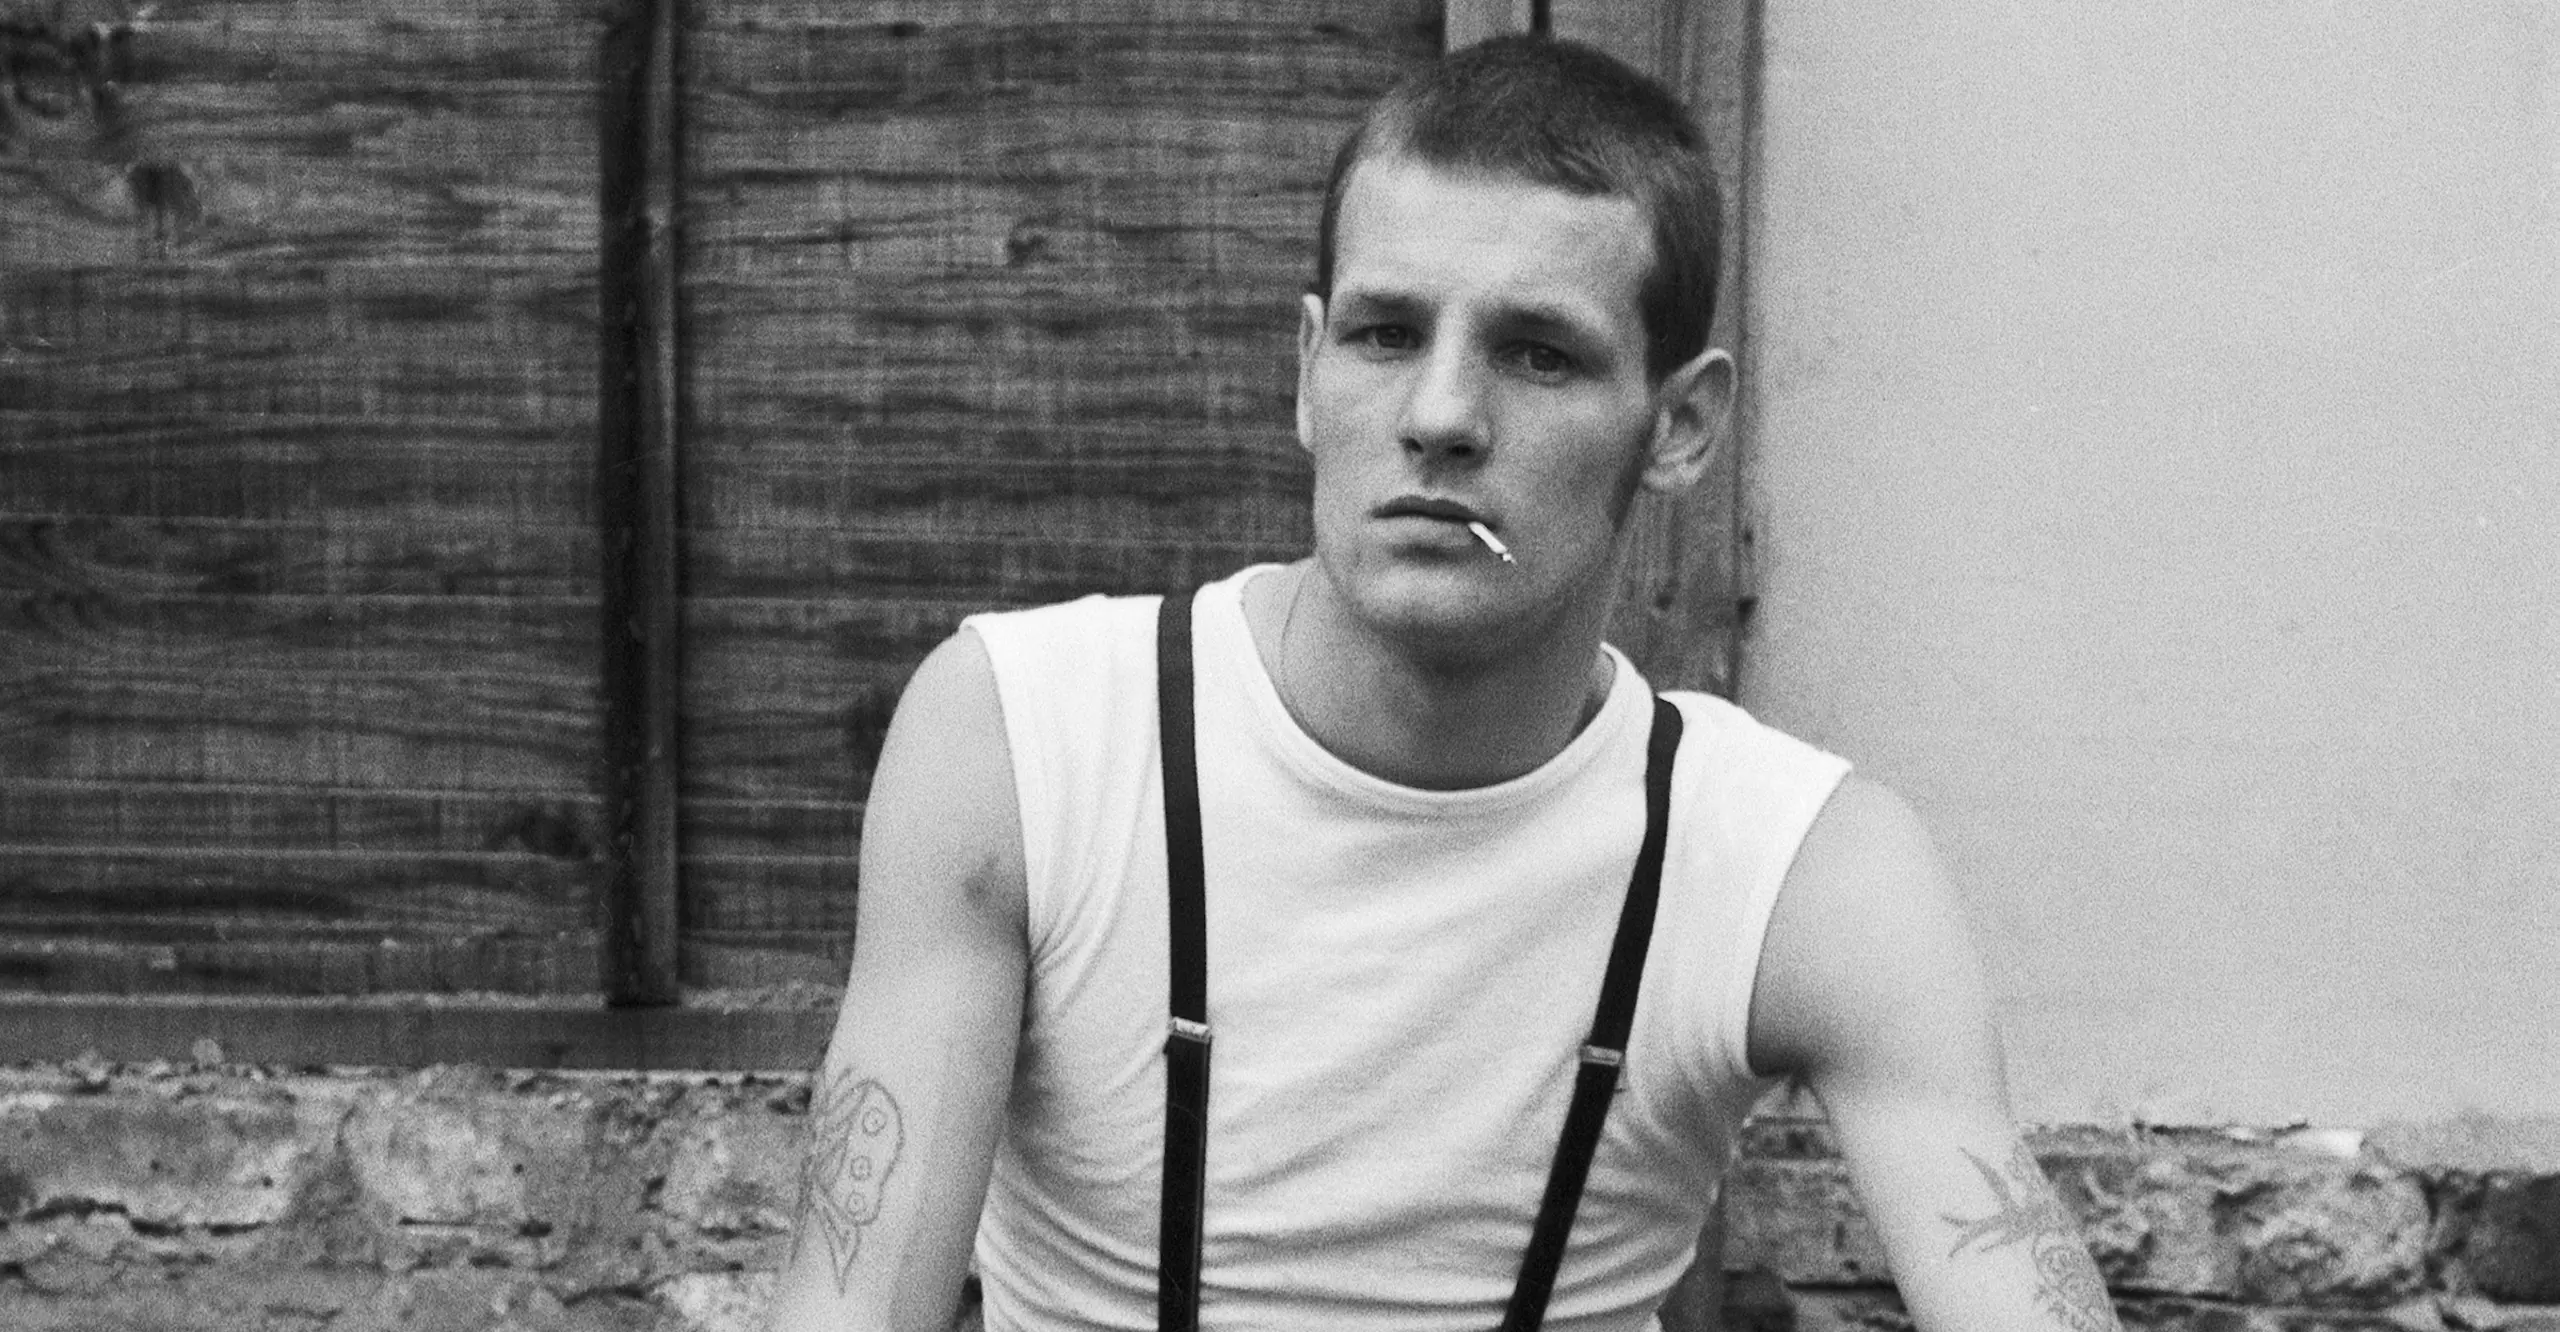 Black and white photograph of a young man in a white sleeveless vest and braces, short cropped hair and cigarette dangling from mouth, staring into at the camera.